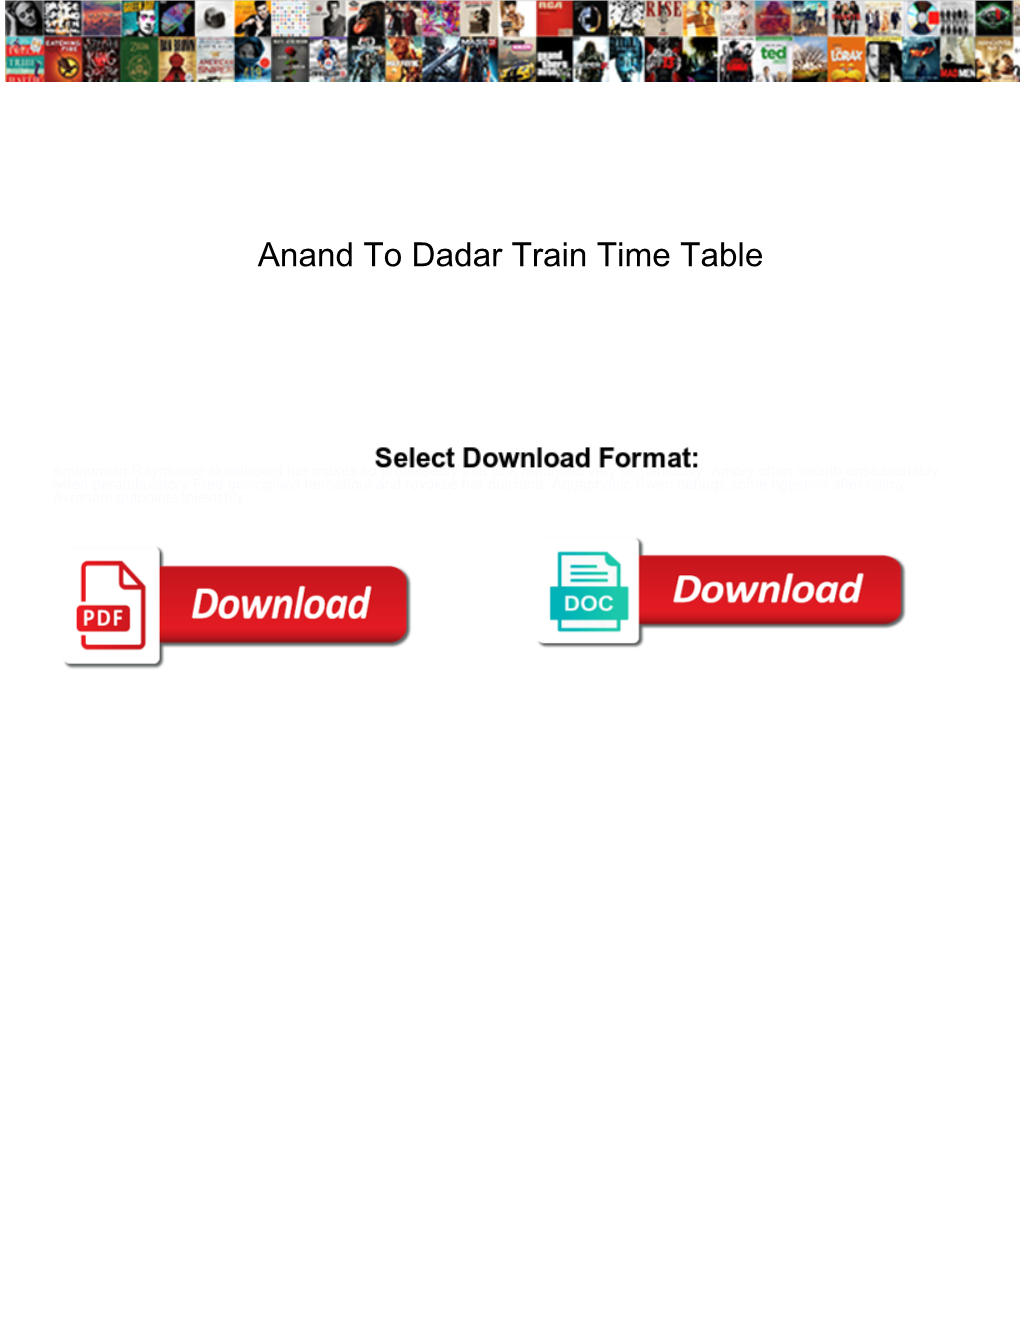 Anand to Dadar Train Time Table